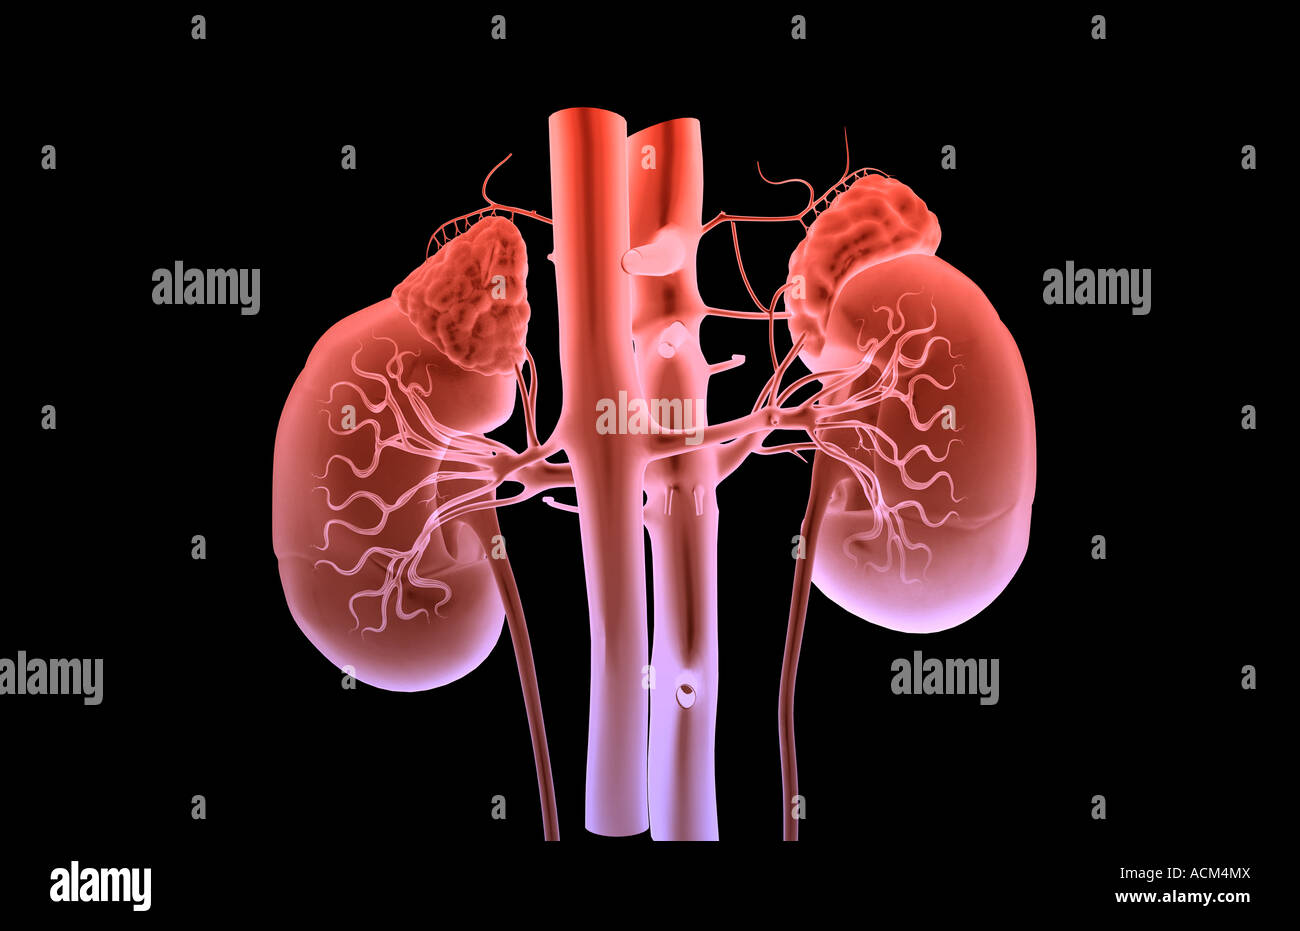 Blood supply of the kidneys Stock Photo